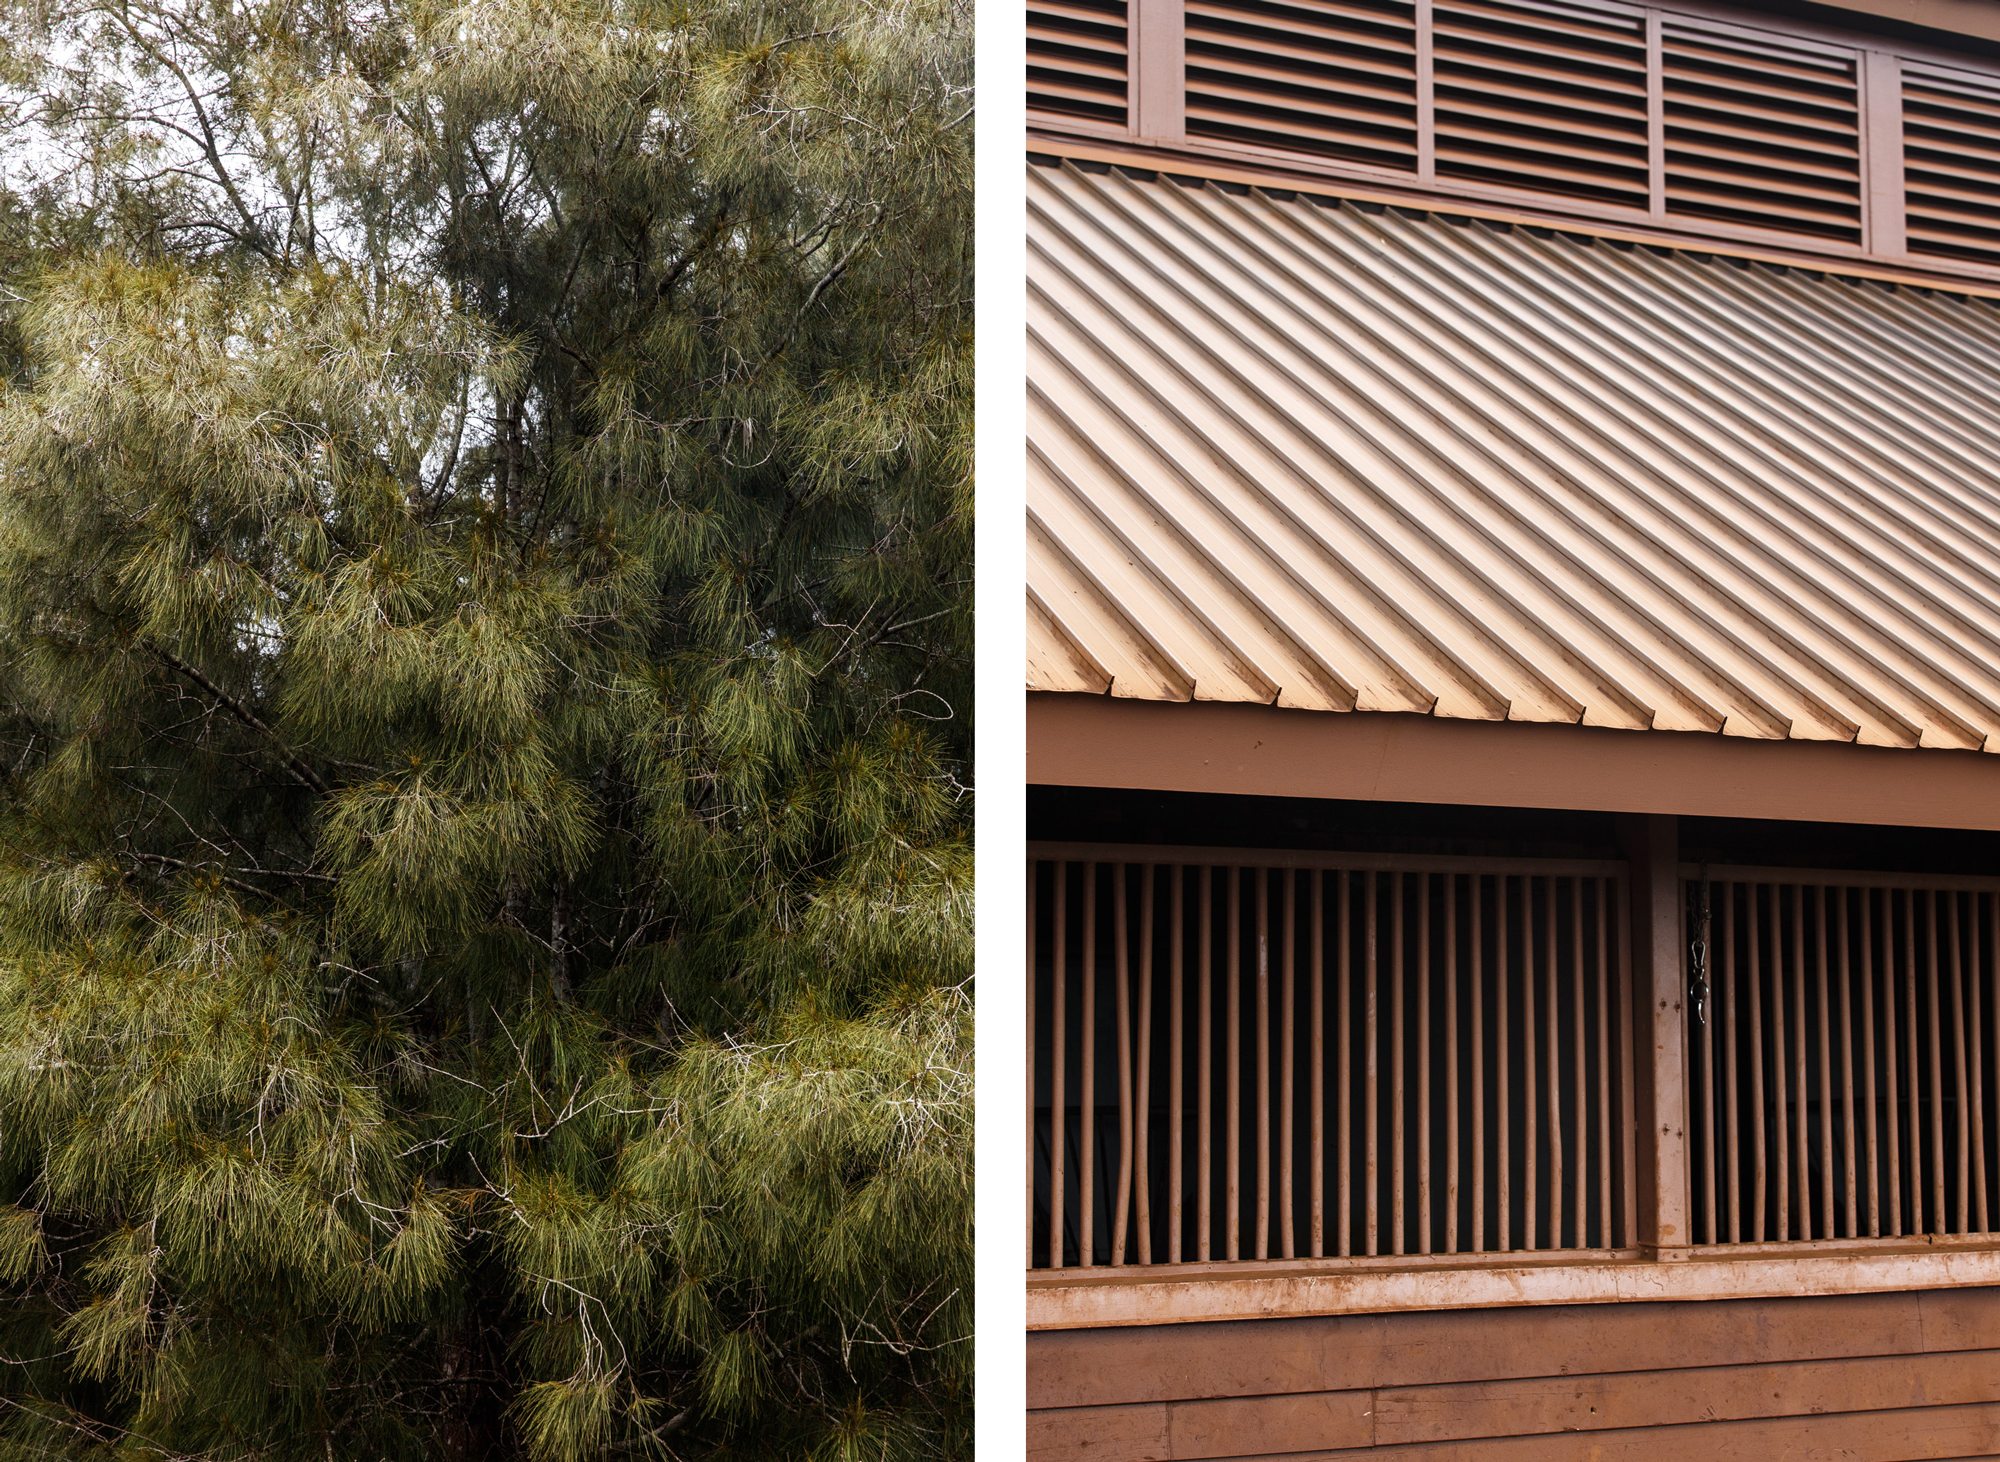 Lanai pine tree, stable roof and window comparison